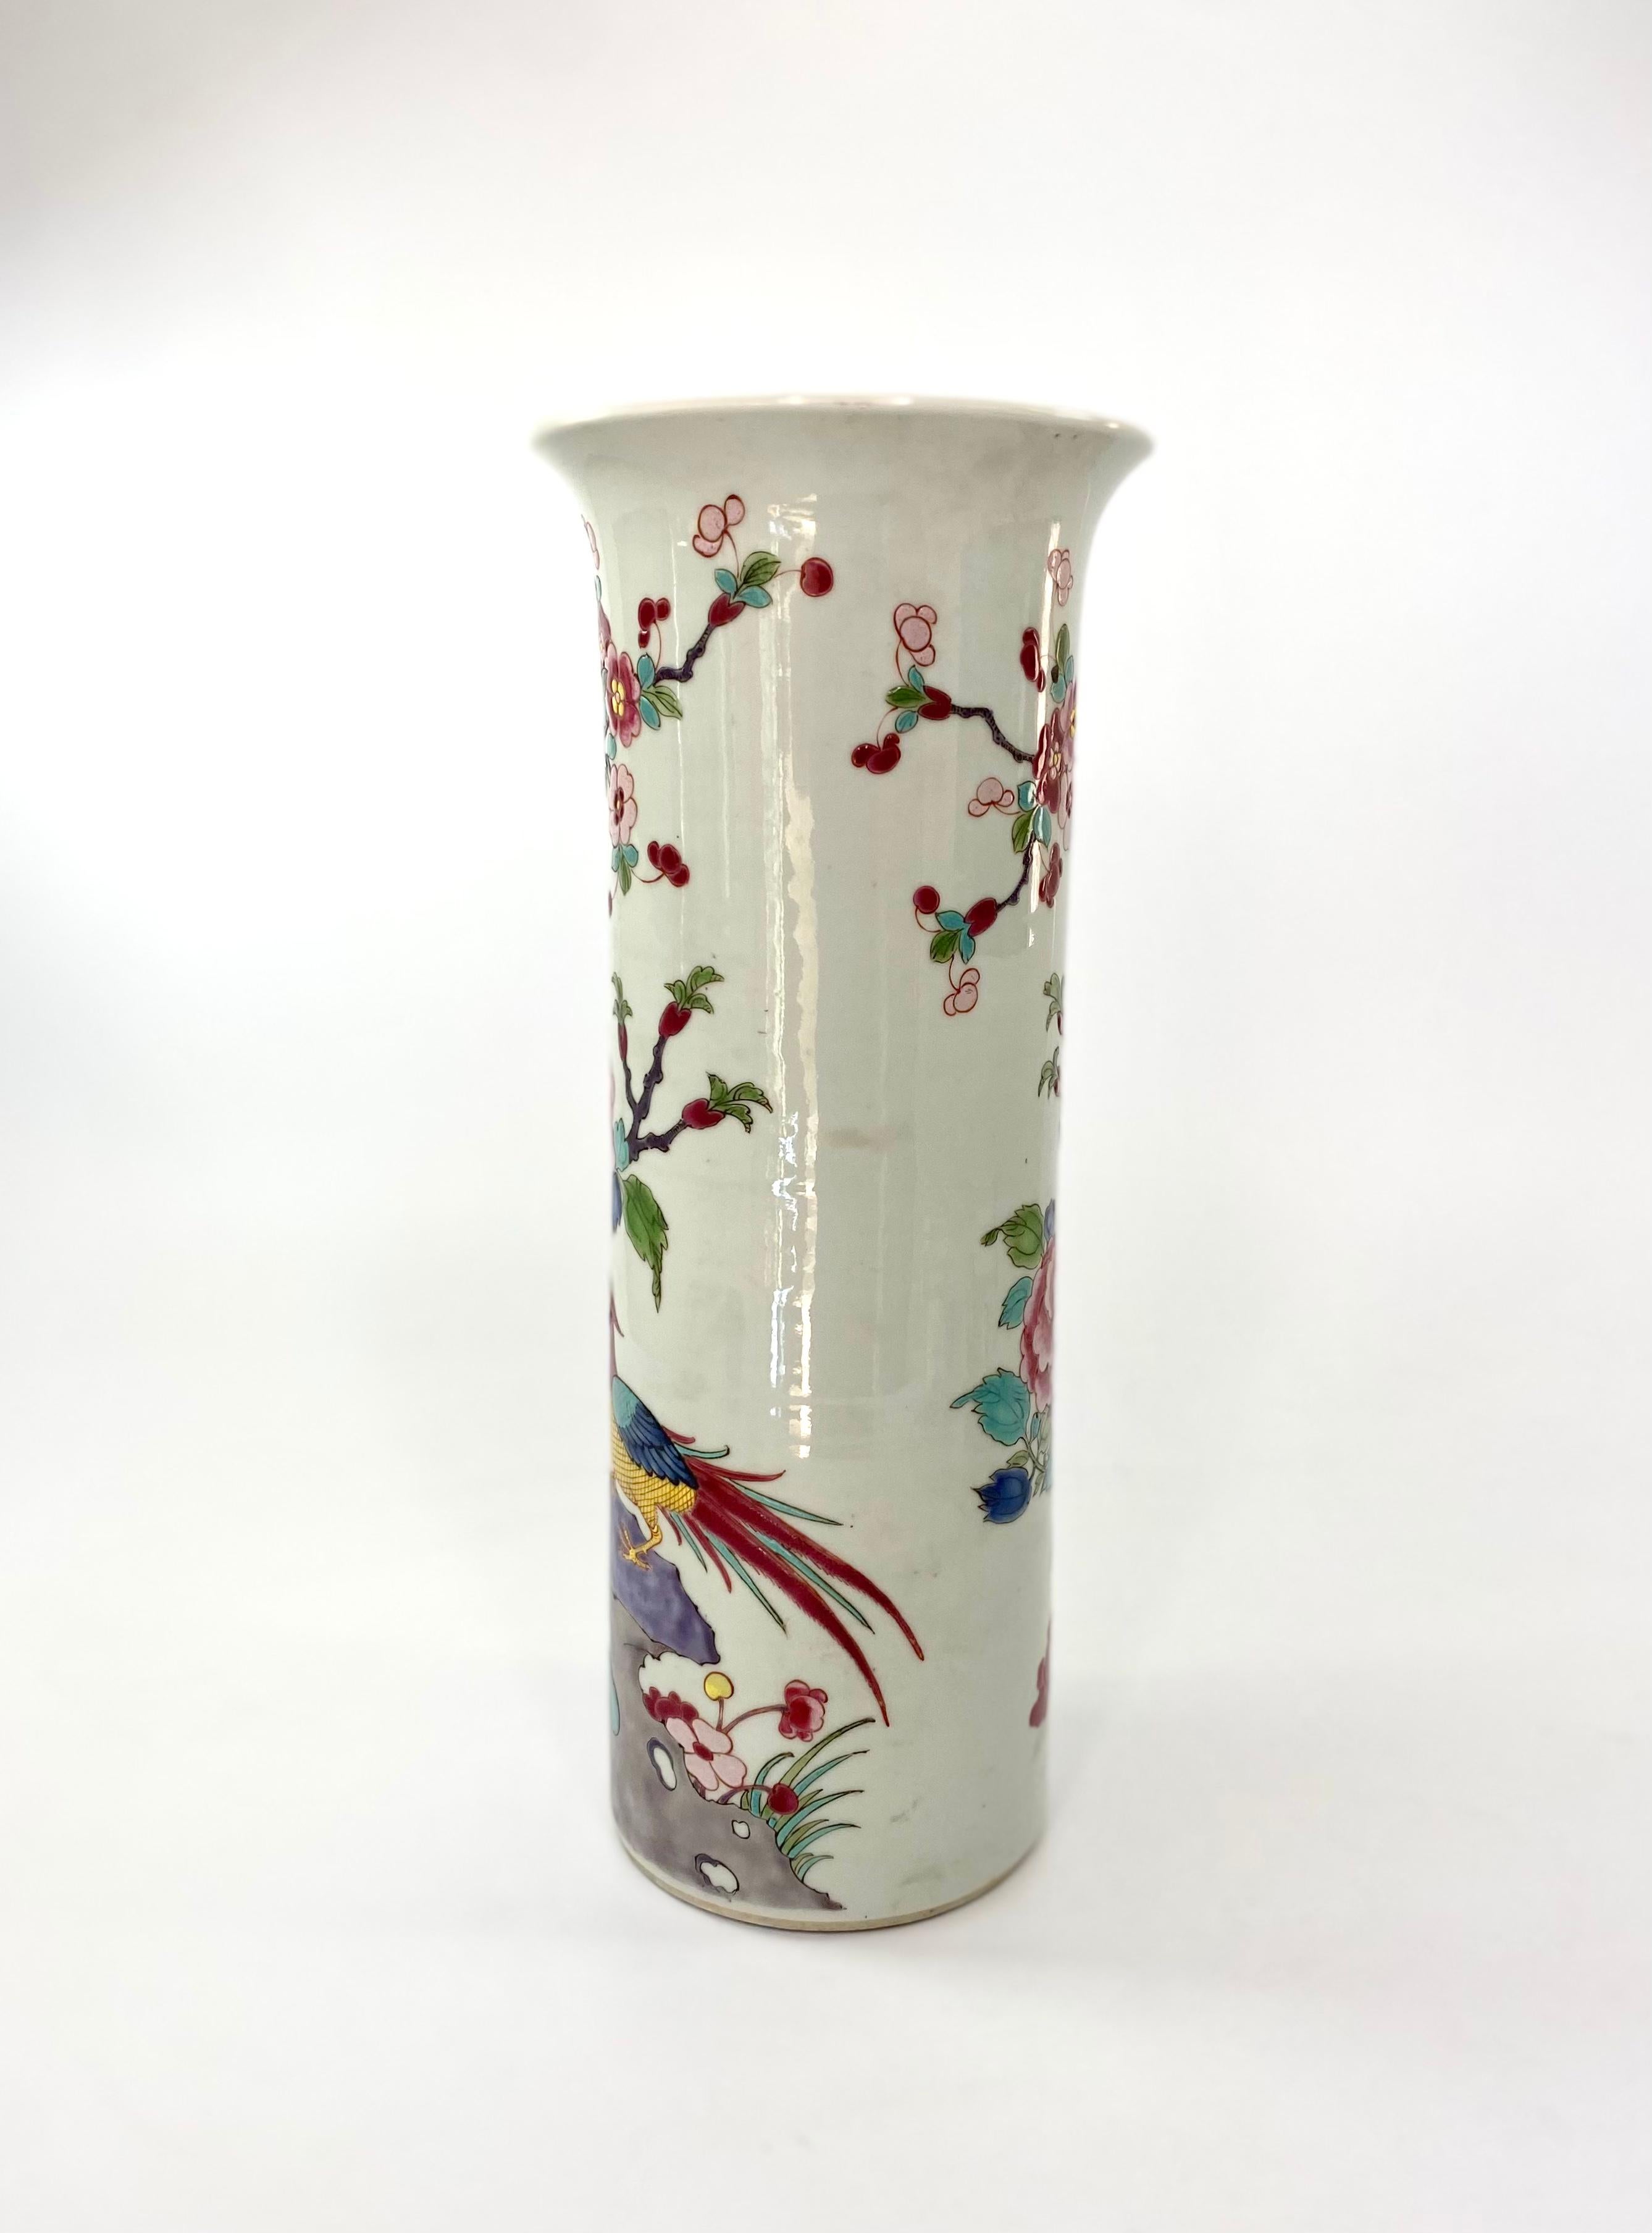 Fired Chinese Porcelain Spill Vase, Exotic Birds, c. 1890, Guangxu Period